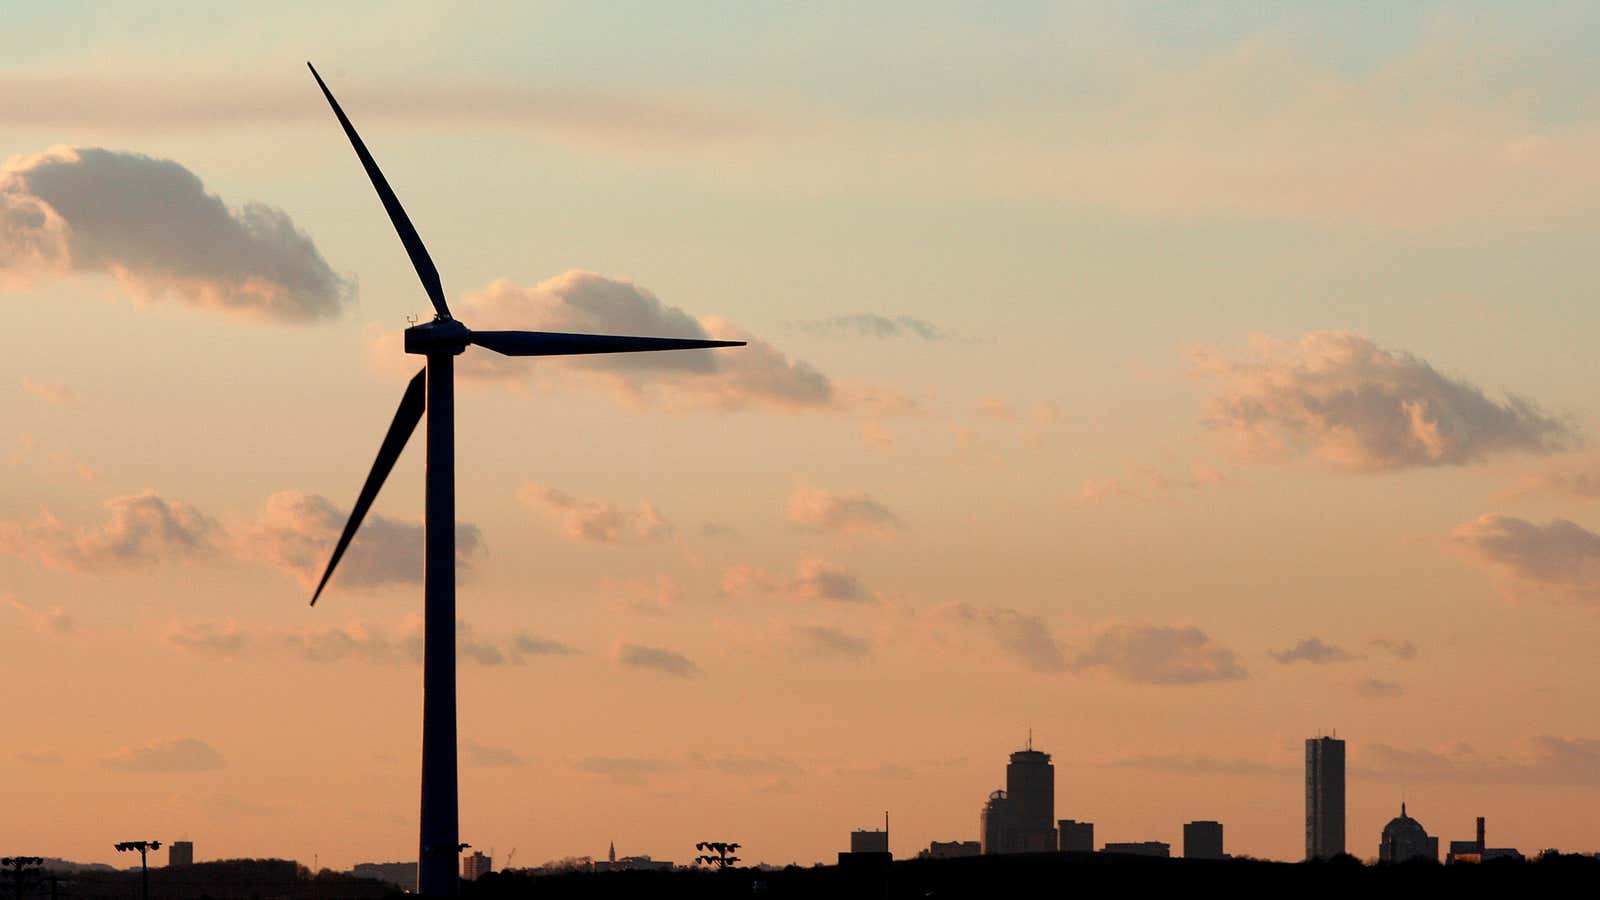 Is it sunset in renewable energy investments already?